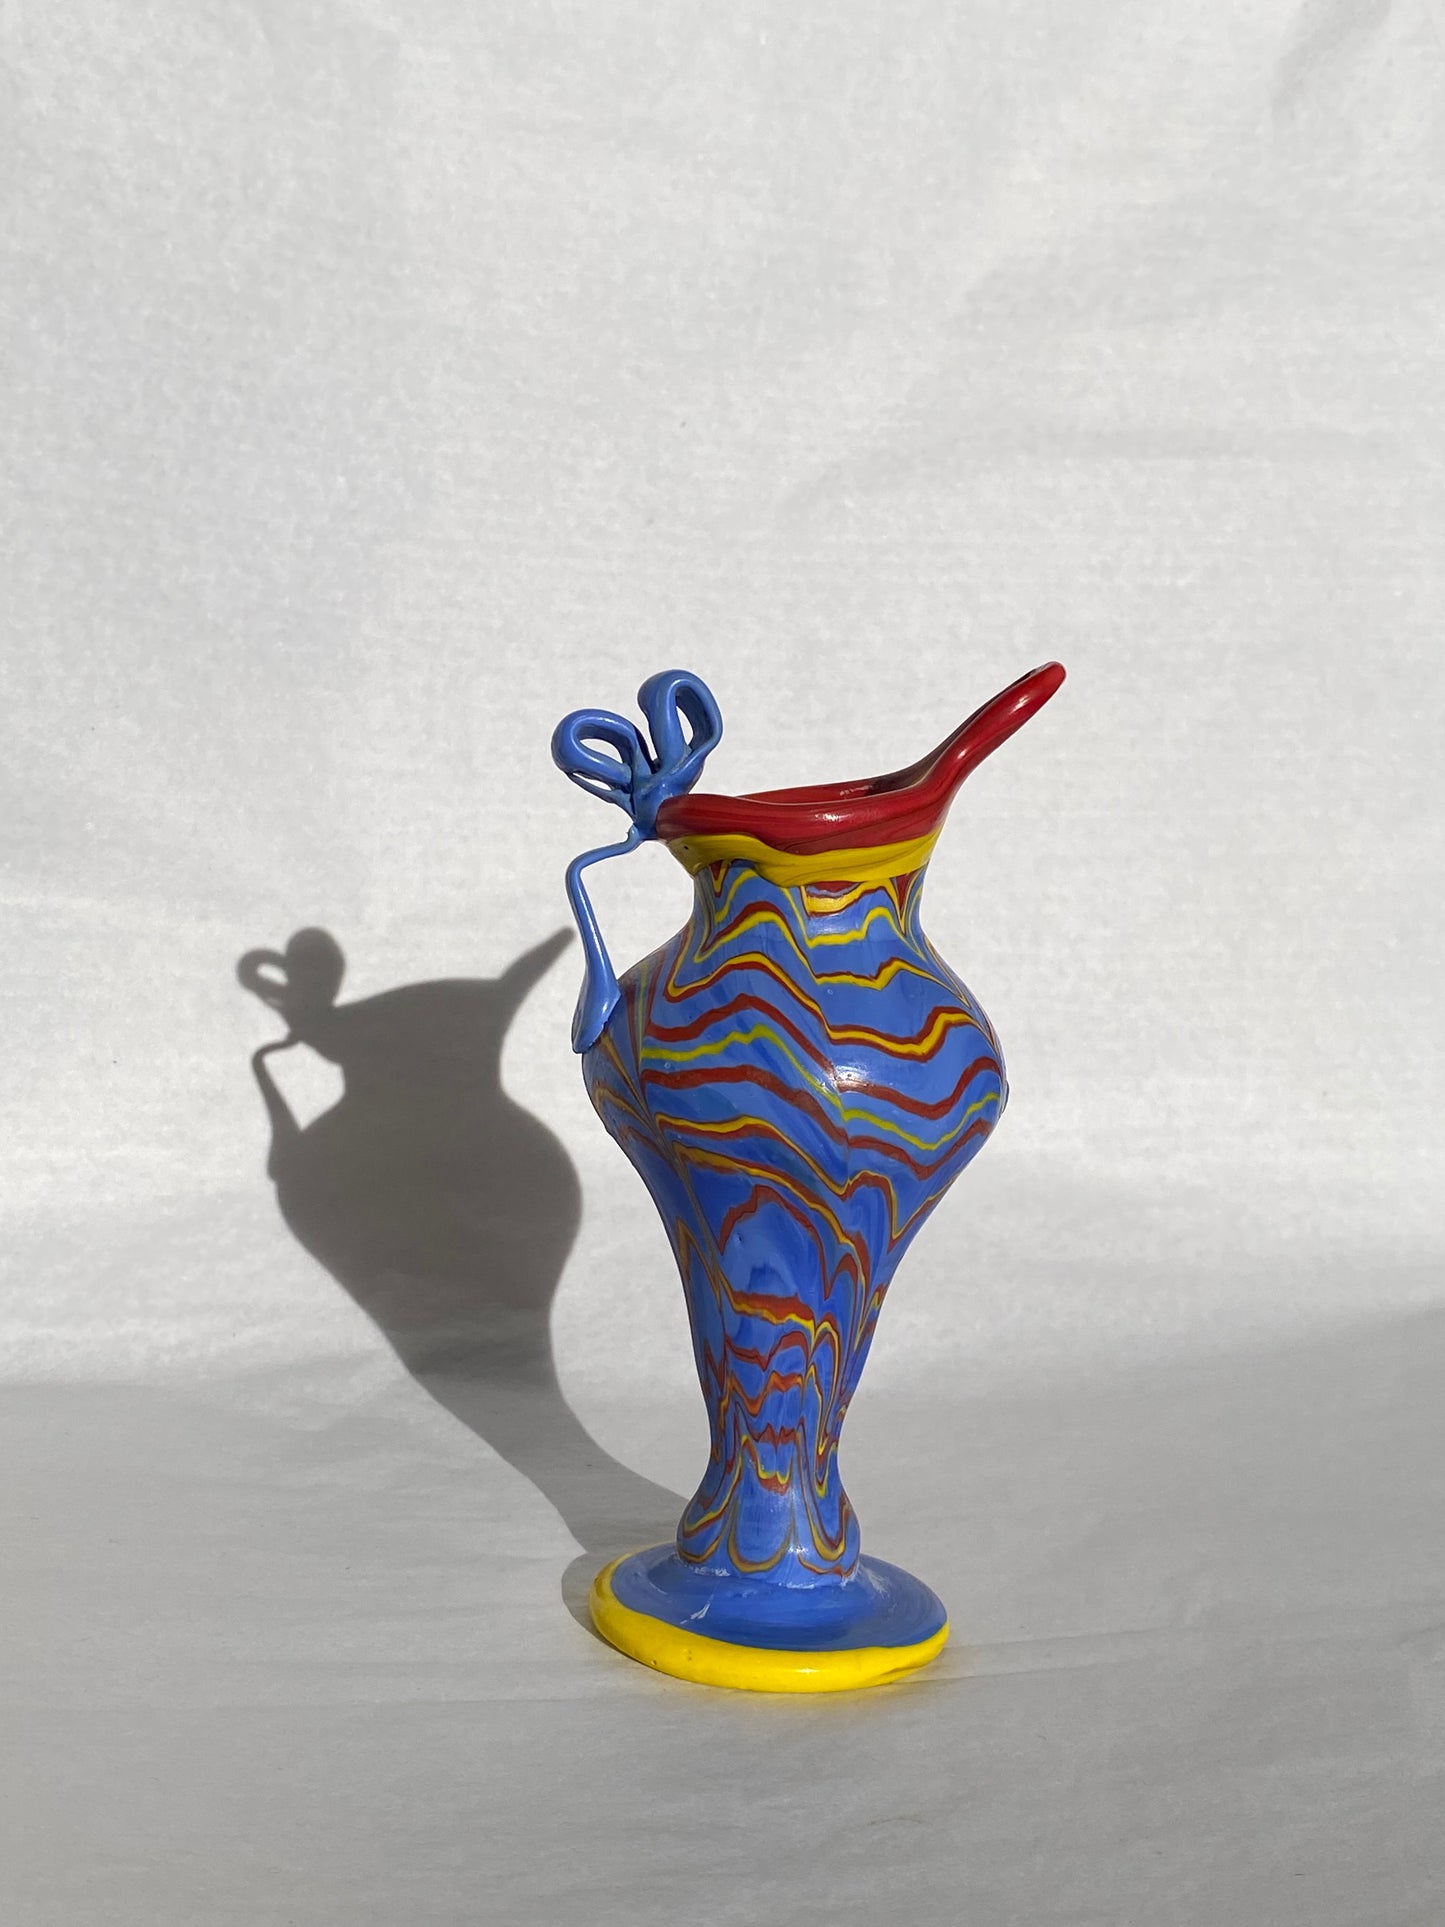 Phoenician glass vase - blue, red and yellow